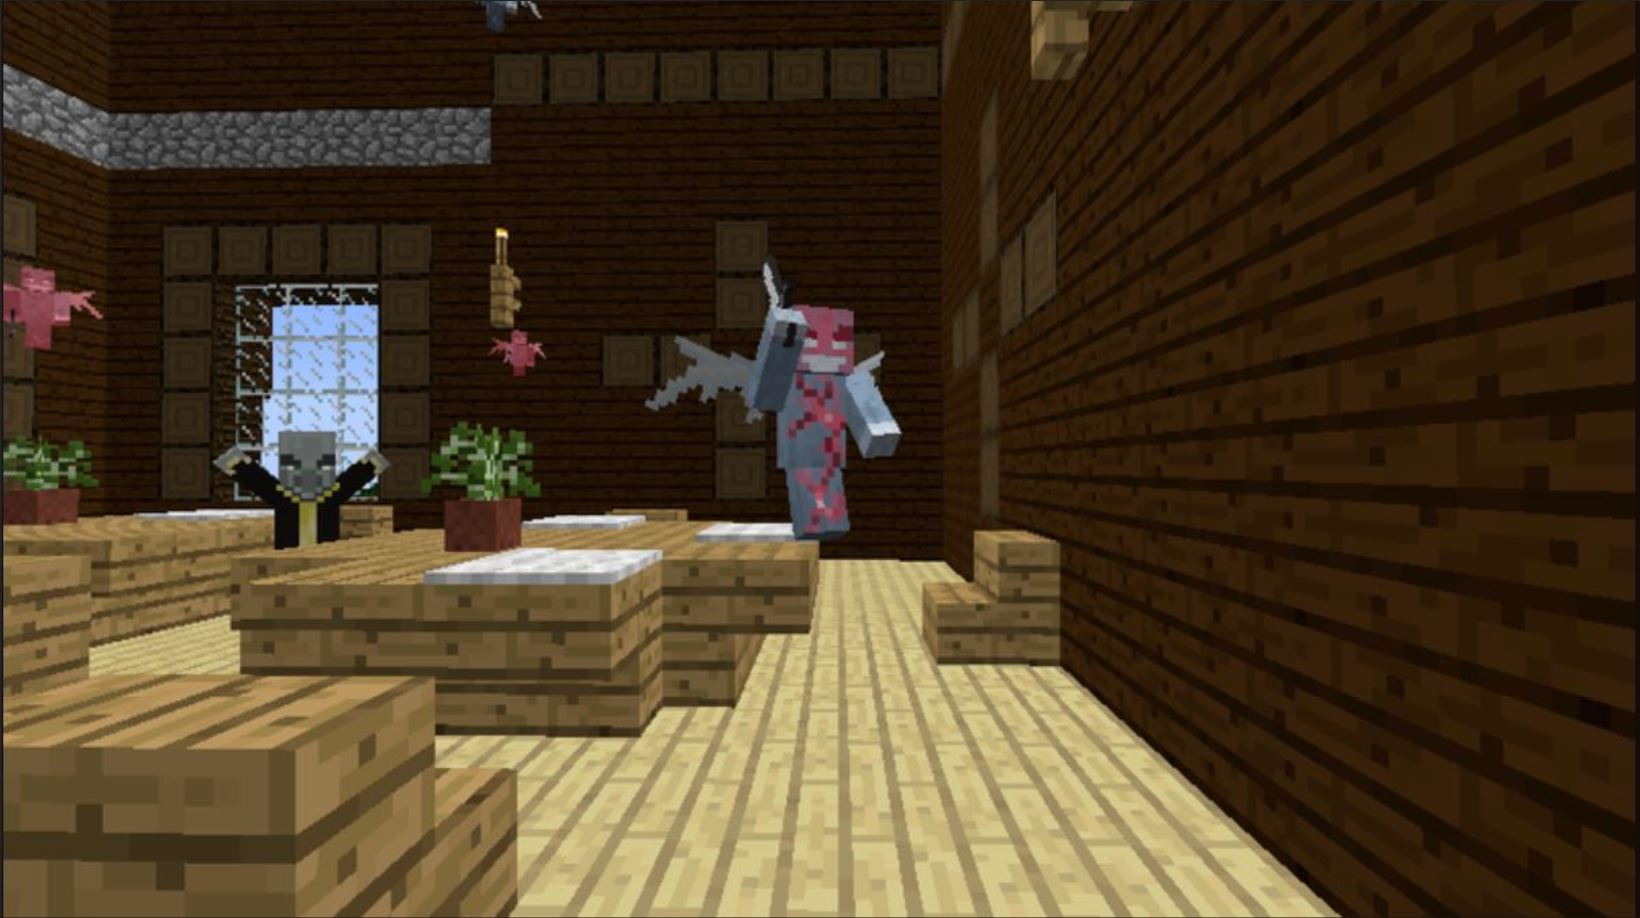 Minecraft Mobs Explored: Vex, A Evil Fairy Spawned And Controlled By The Evil Evoker